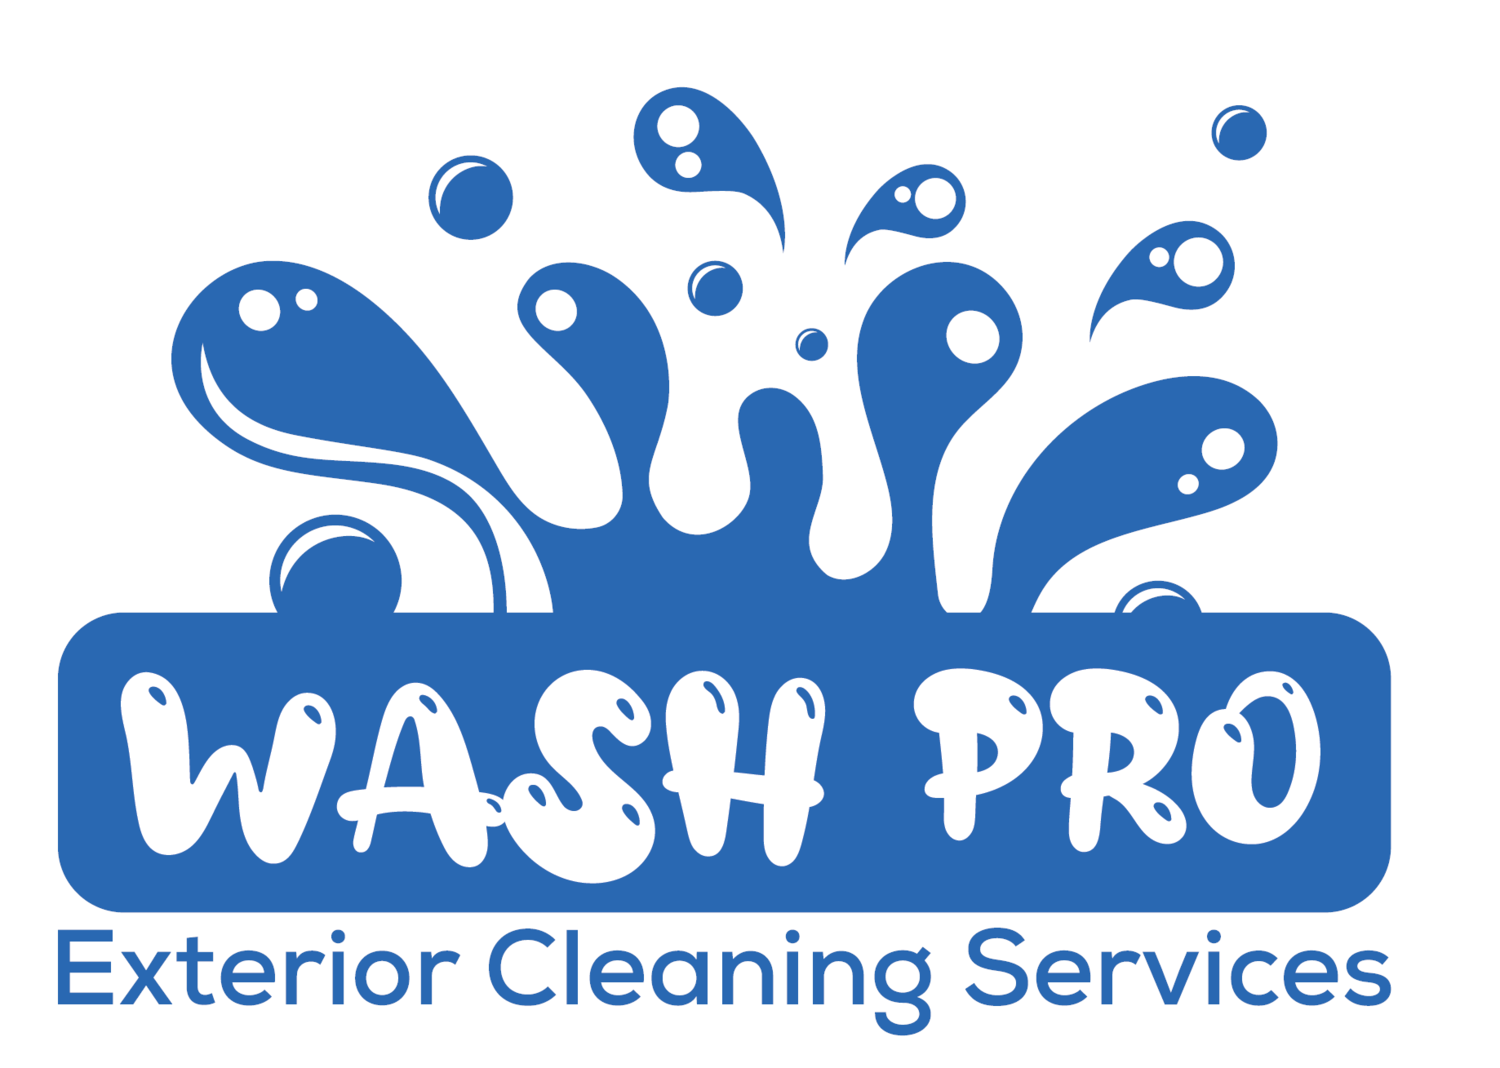 Wash Pro Exterior Cleaning Services